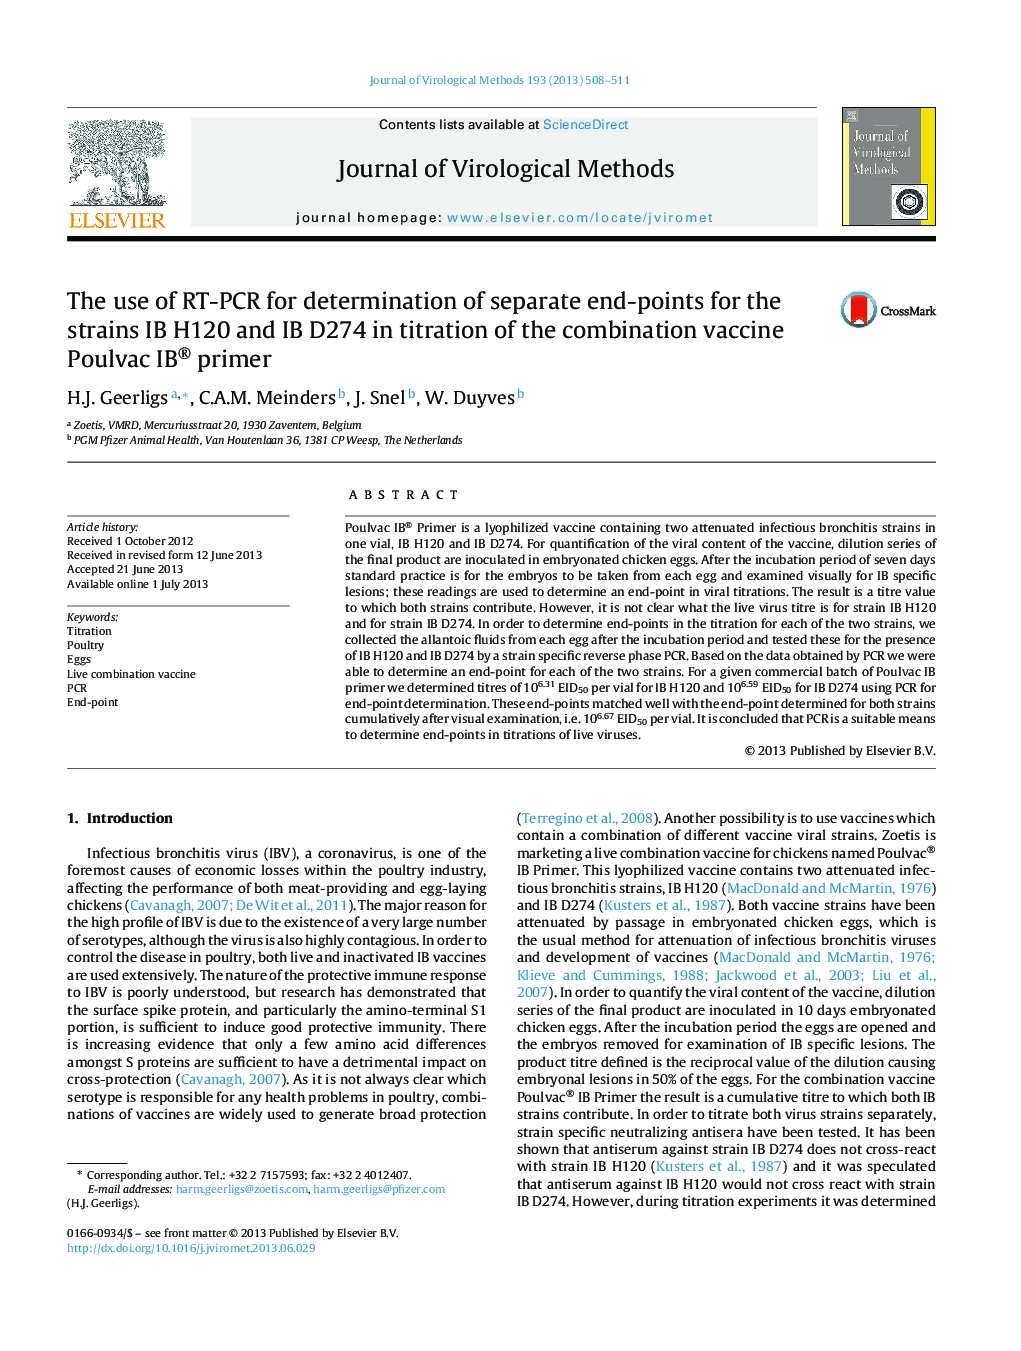 The use of RT-PCR for determination of separate end-points for the strains IB H120 and IB D274 in titration of the combination vaccine Poulvac IB® primer